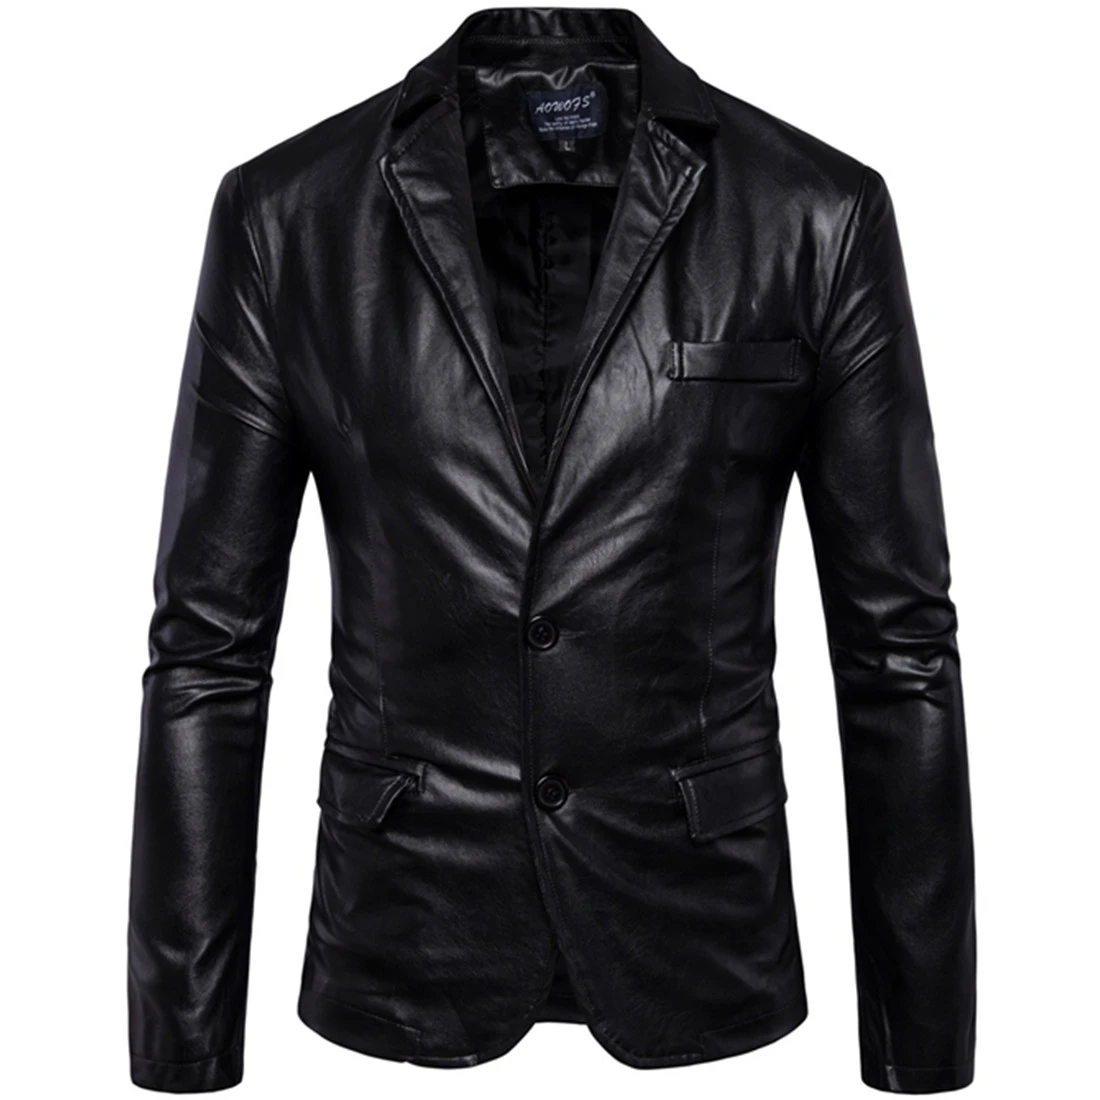 leather baseball jacket Men's Business Casual Classic Simple Style Solid Color Leather Jacket / 2021 New High Quality Male PU Suit Blazers Coat all saints leather jacket mens